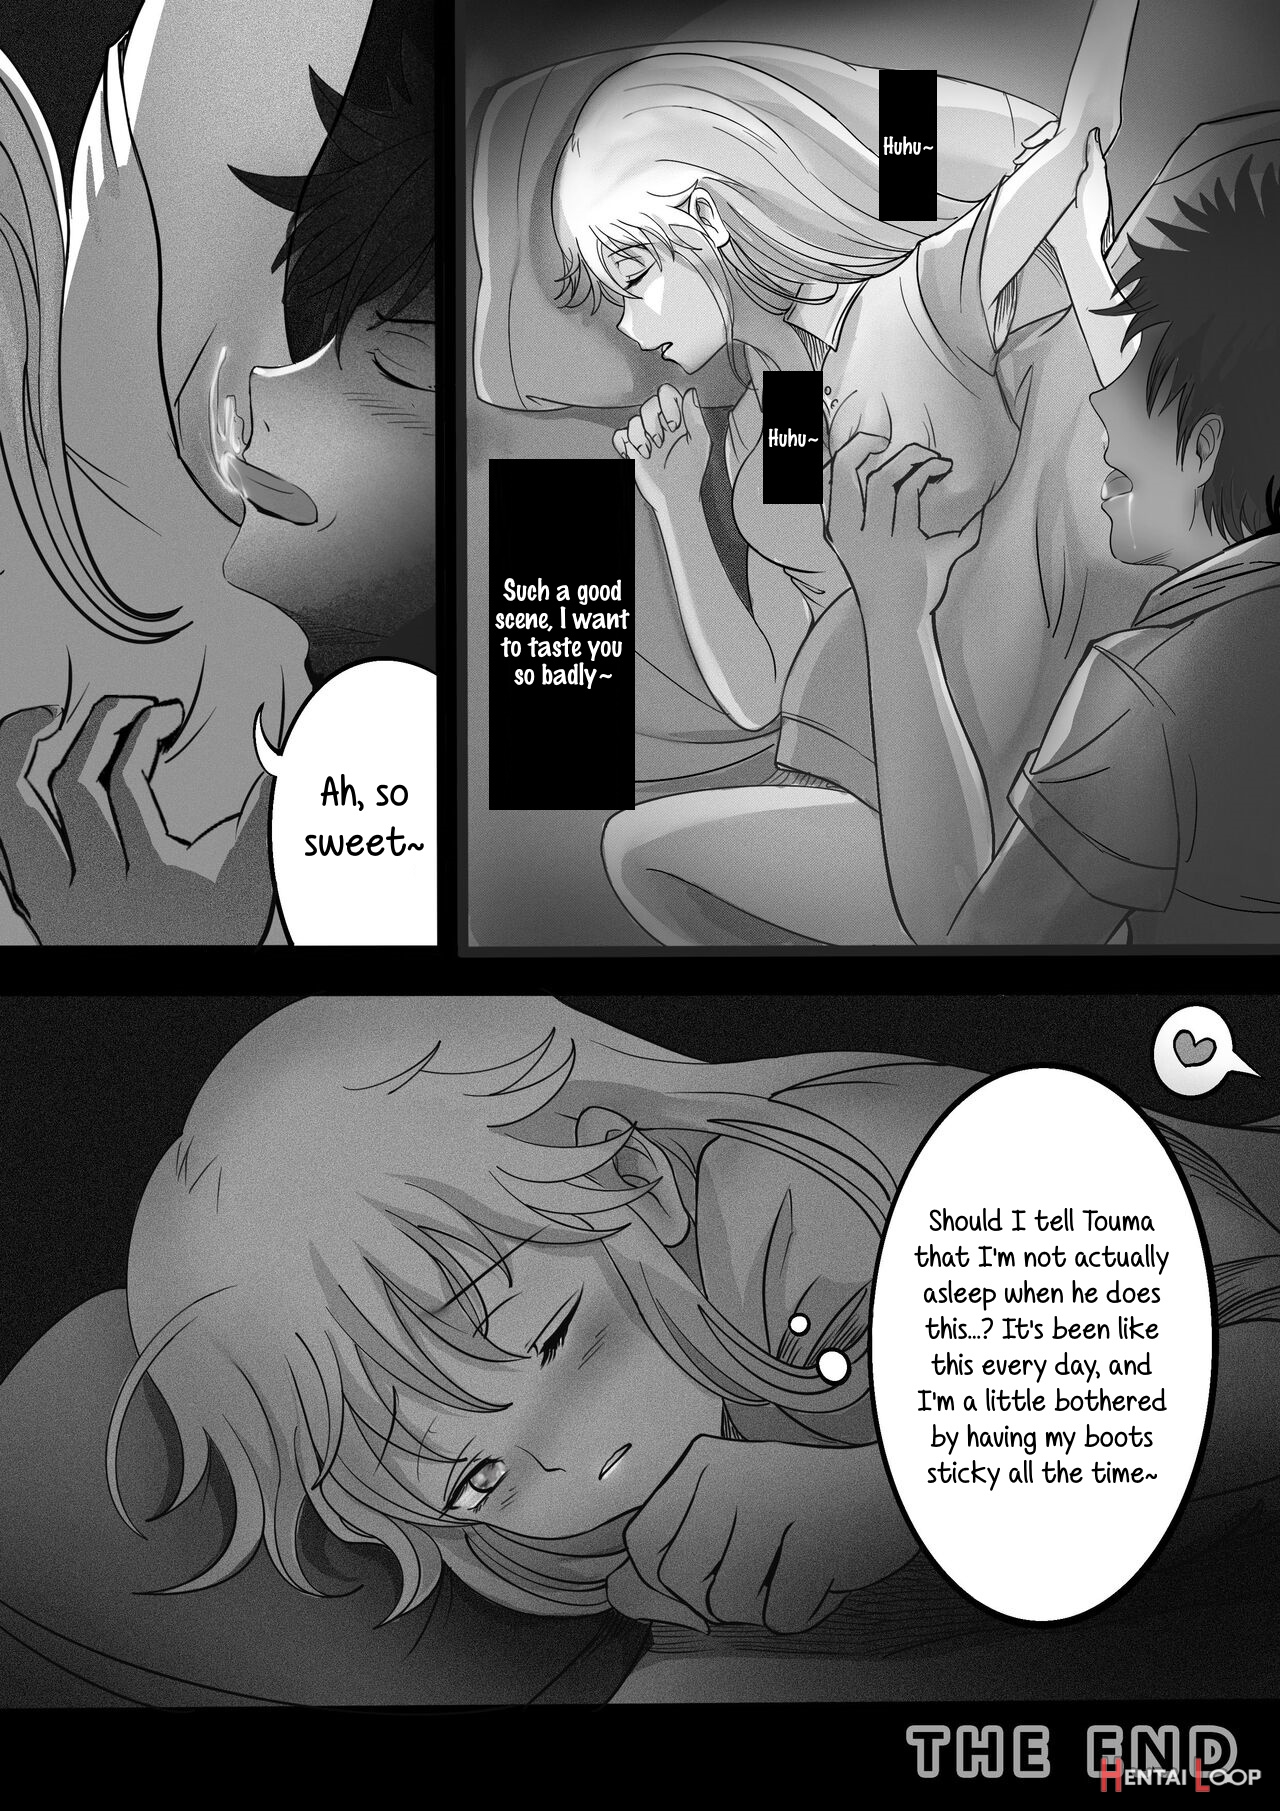 The Daily Life Of Index And Touma Every Night page 7